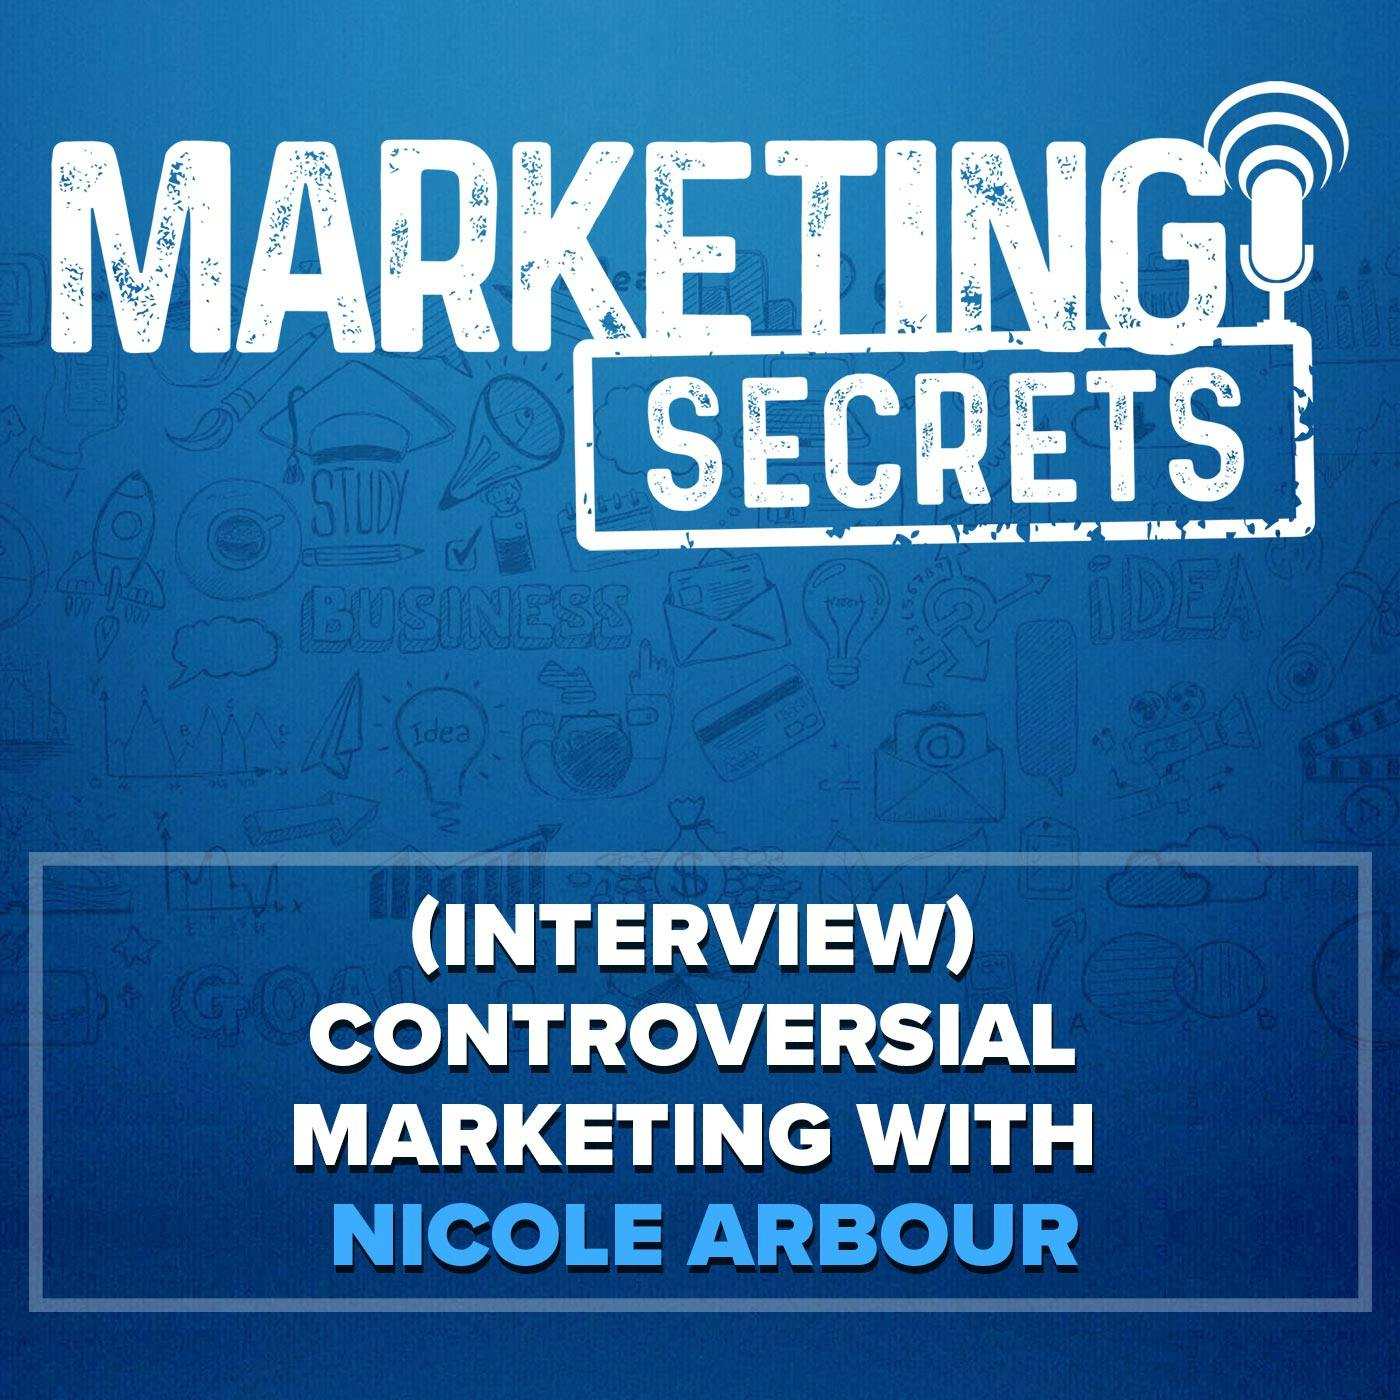 (Interview) Controversial Marketing with Nicole Arbour